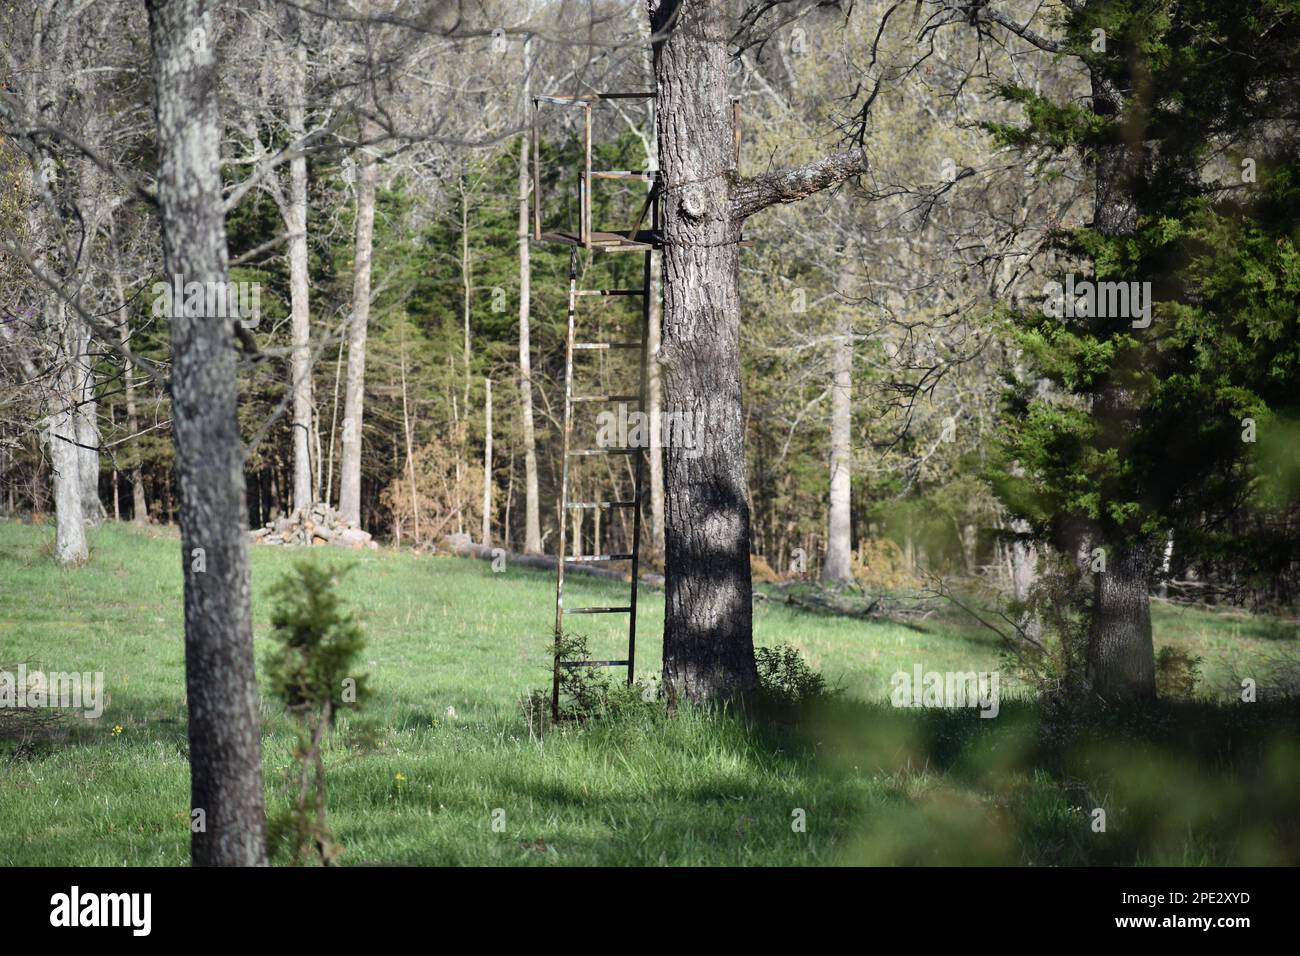 An old metal ladder deer stand set up on a farm in rural Missouri, MO, United States, US, USA.  Deer season is like a holiday to many in the area. Stock Photo